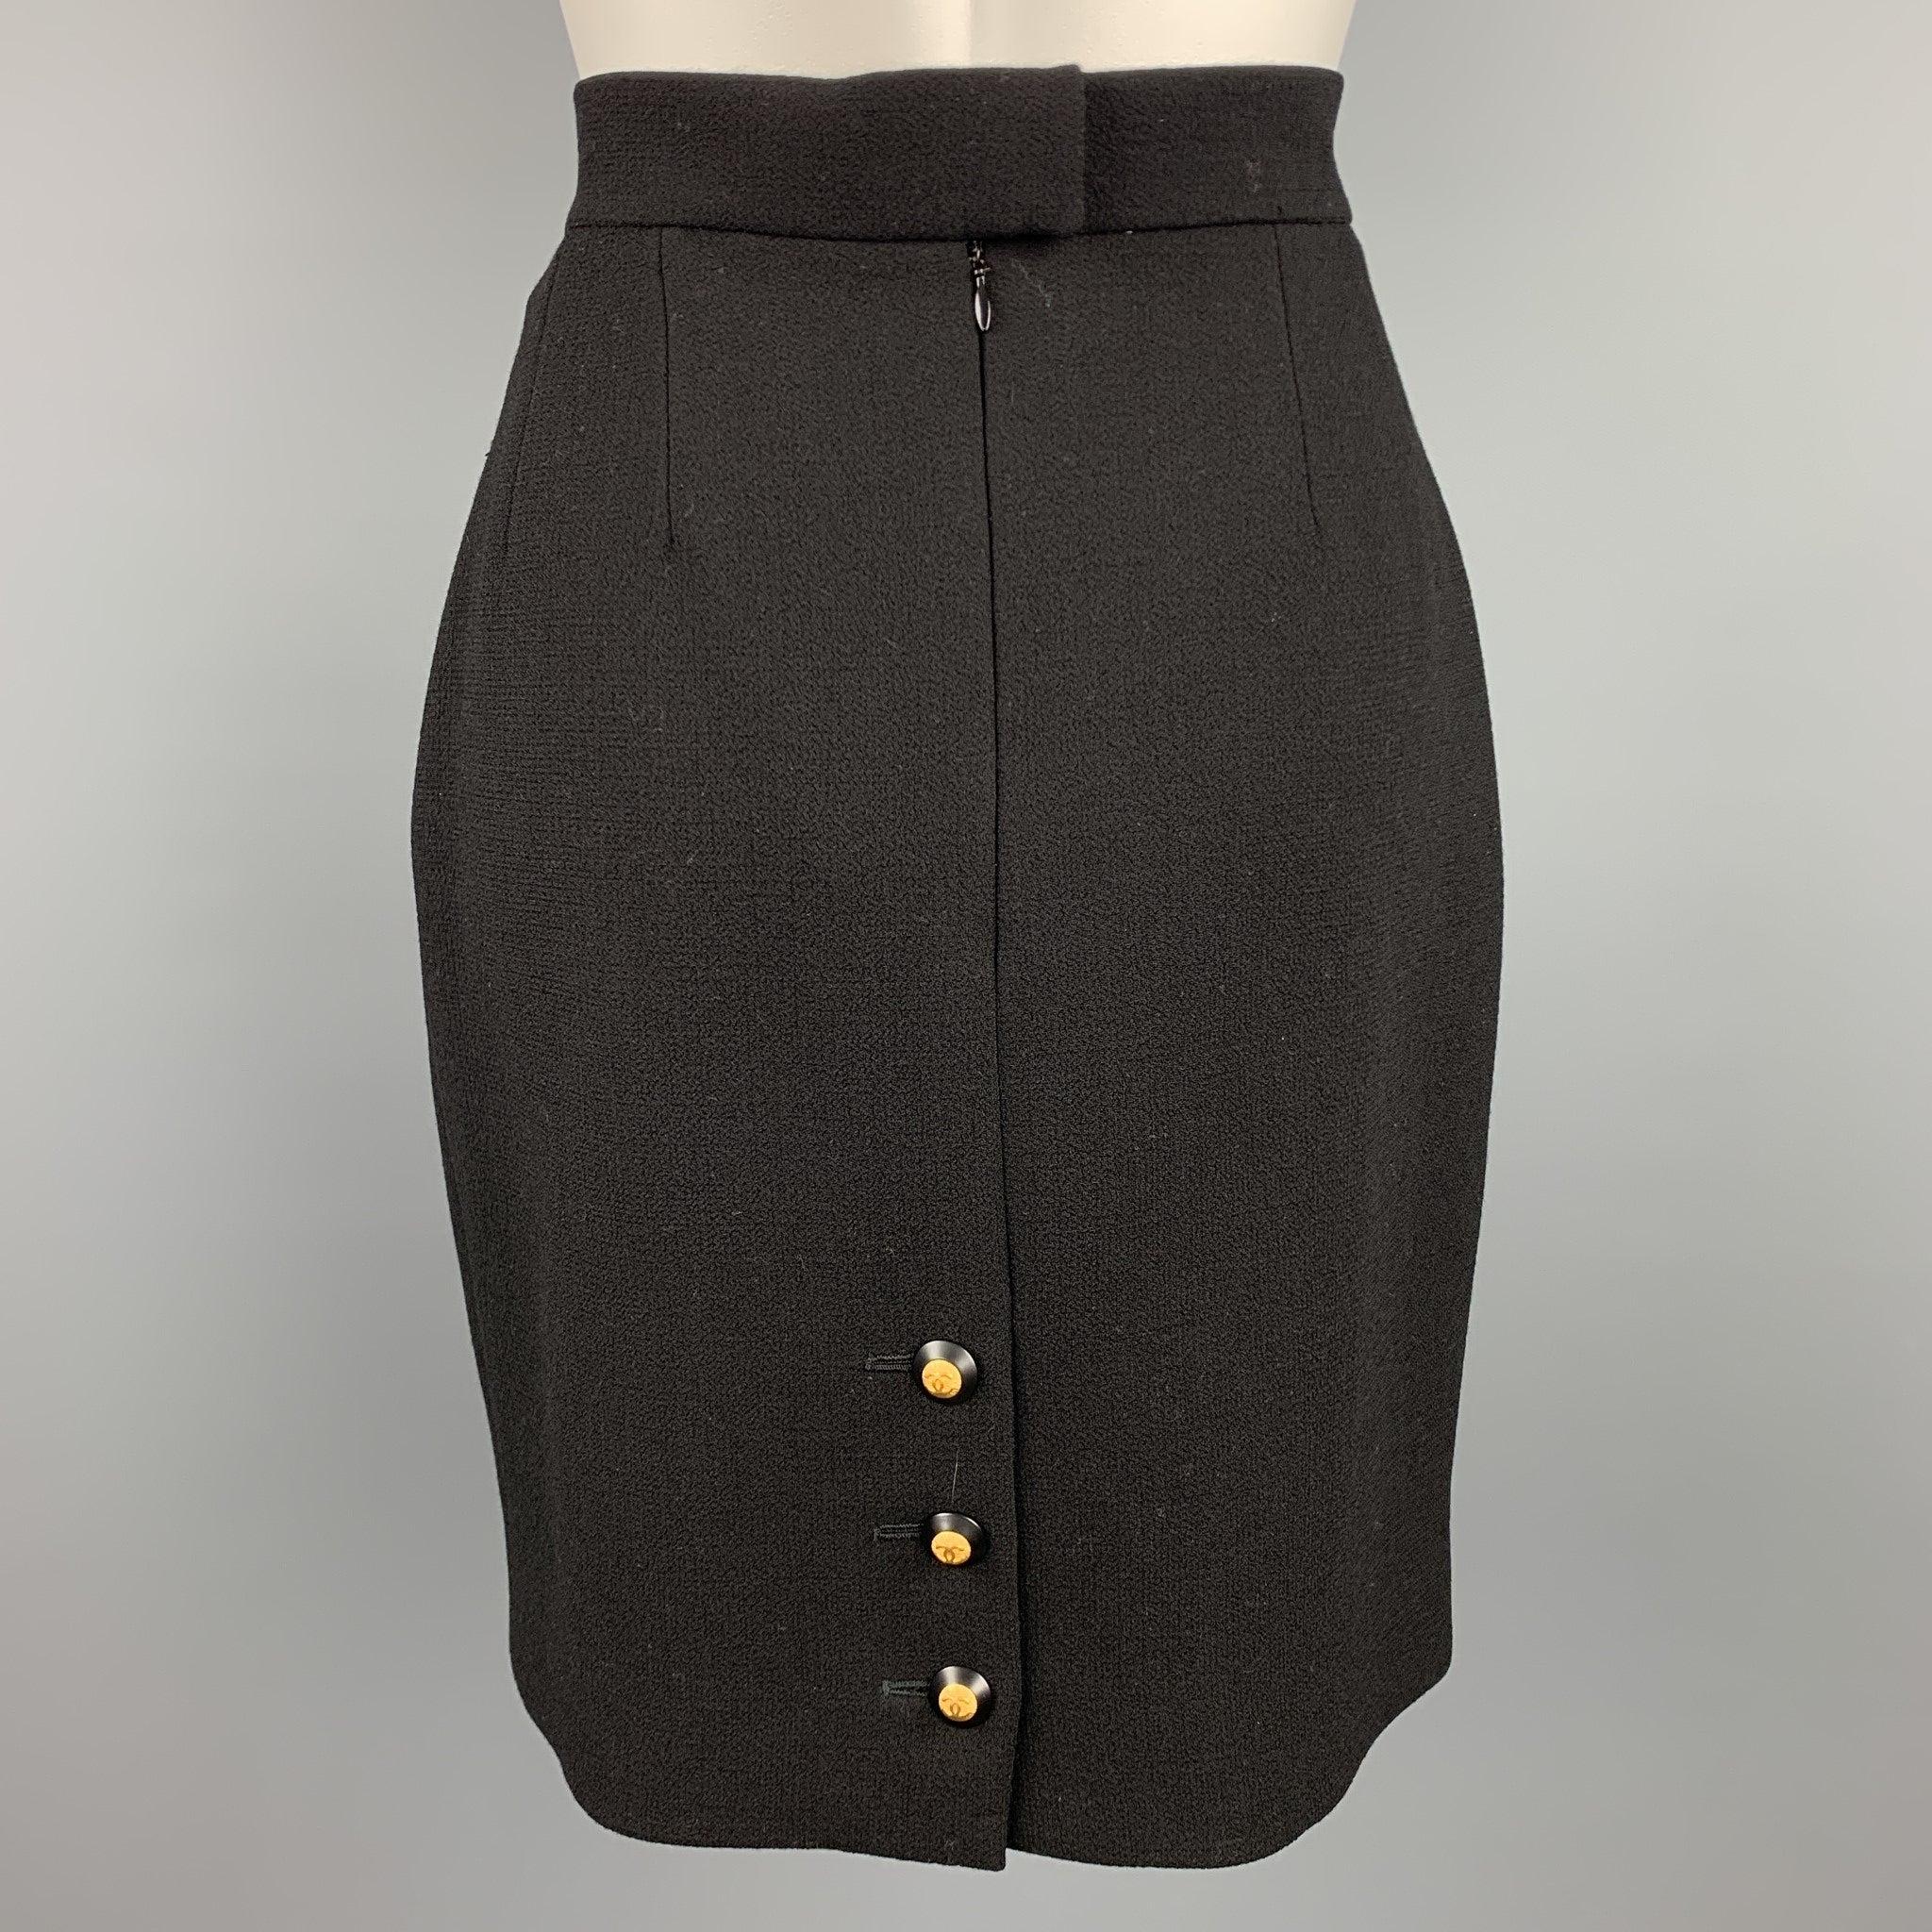 CHANEL Size 10 Black Crepe Wool Pencil Skirt In Good Condition For Sale In San Francisco, CA